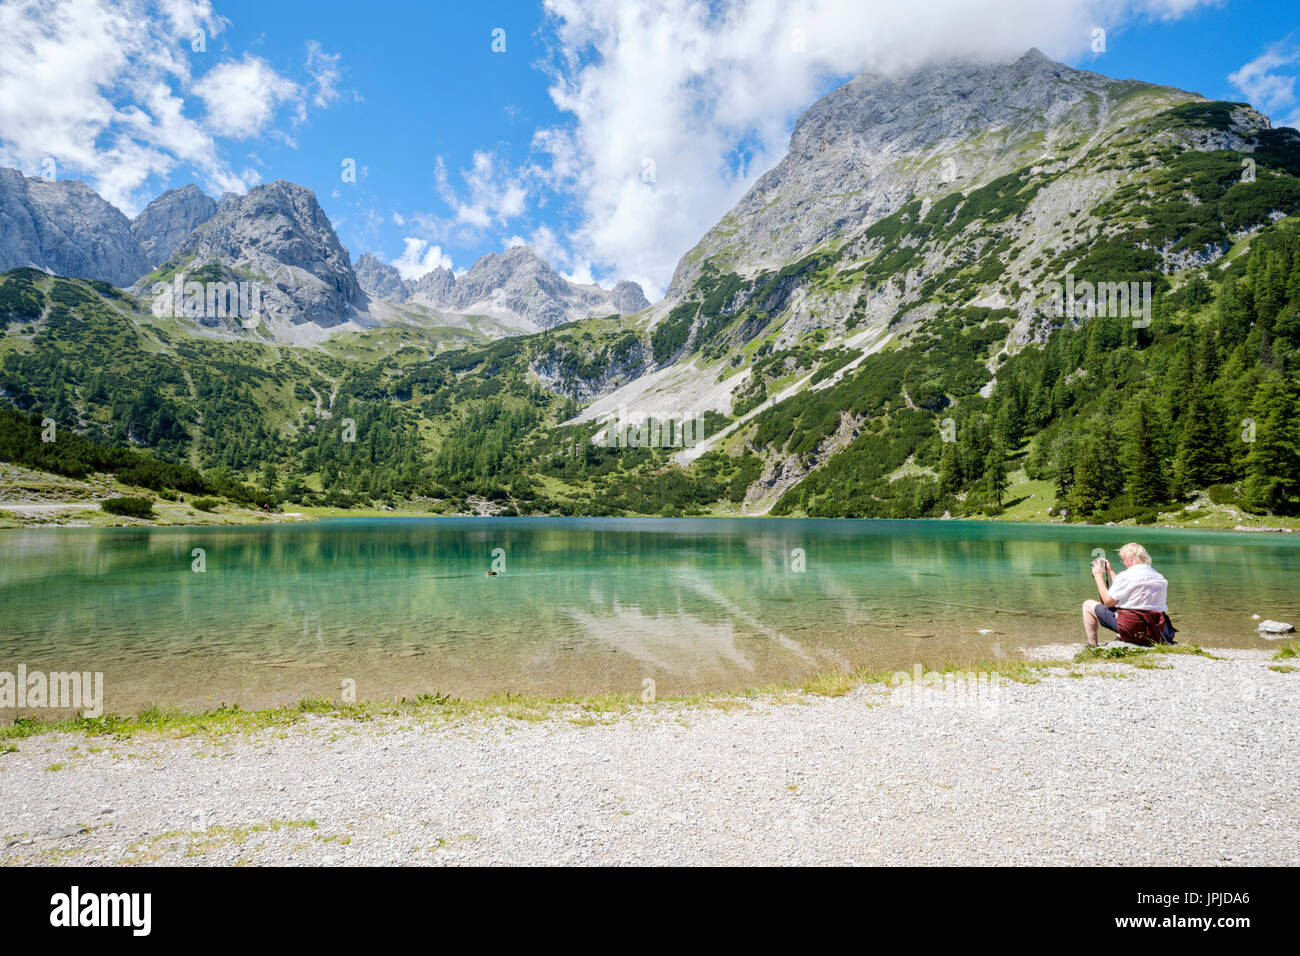 Seebensee in front of the Mieminger Mountain range, Ehrwald, Tyrol, Austria Stock Photo